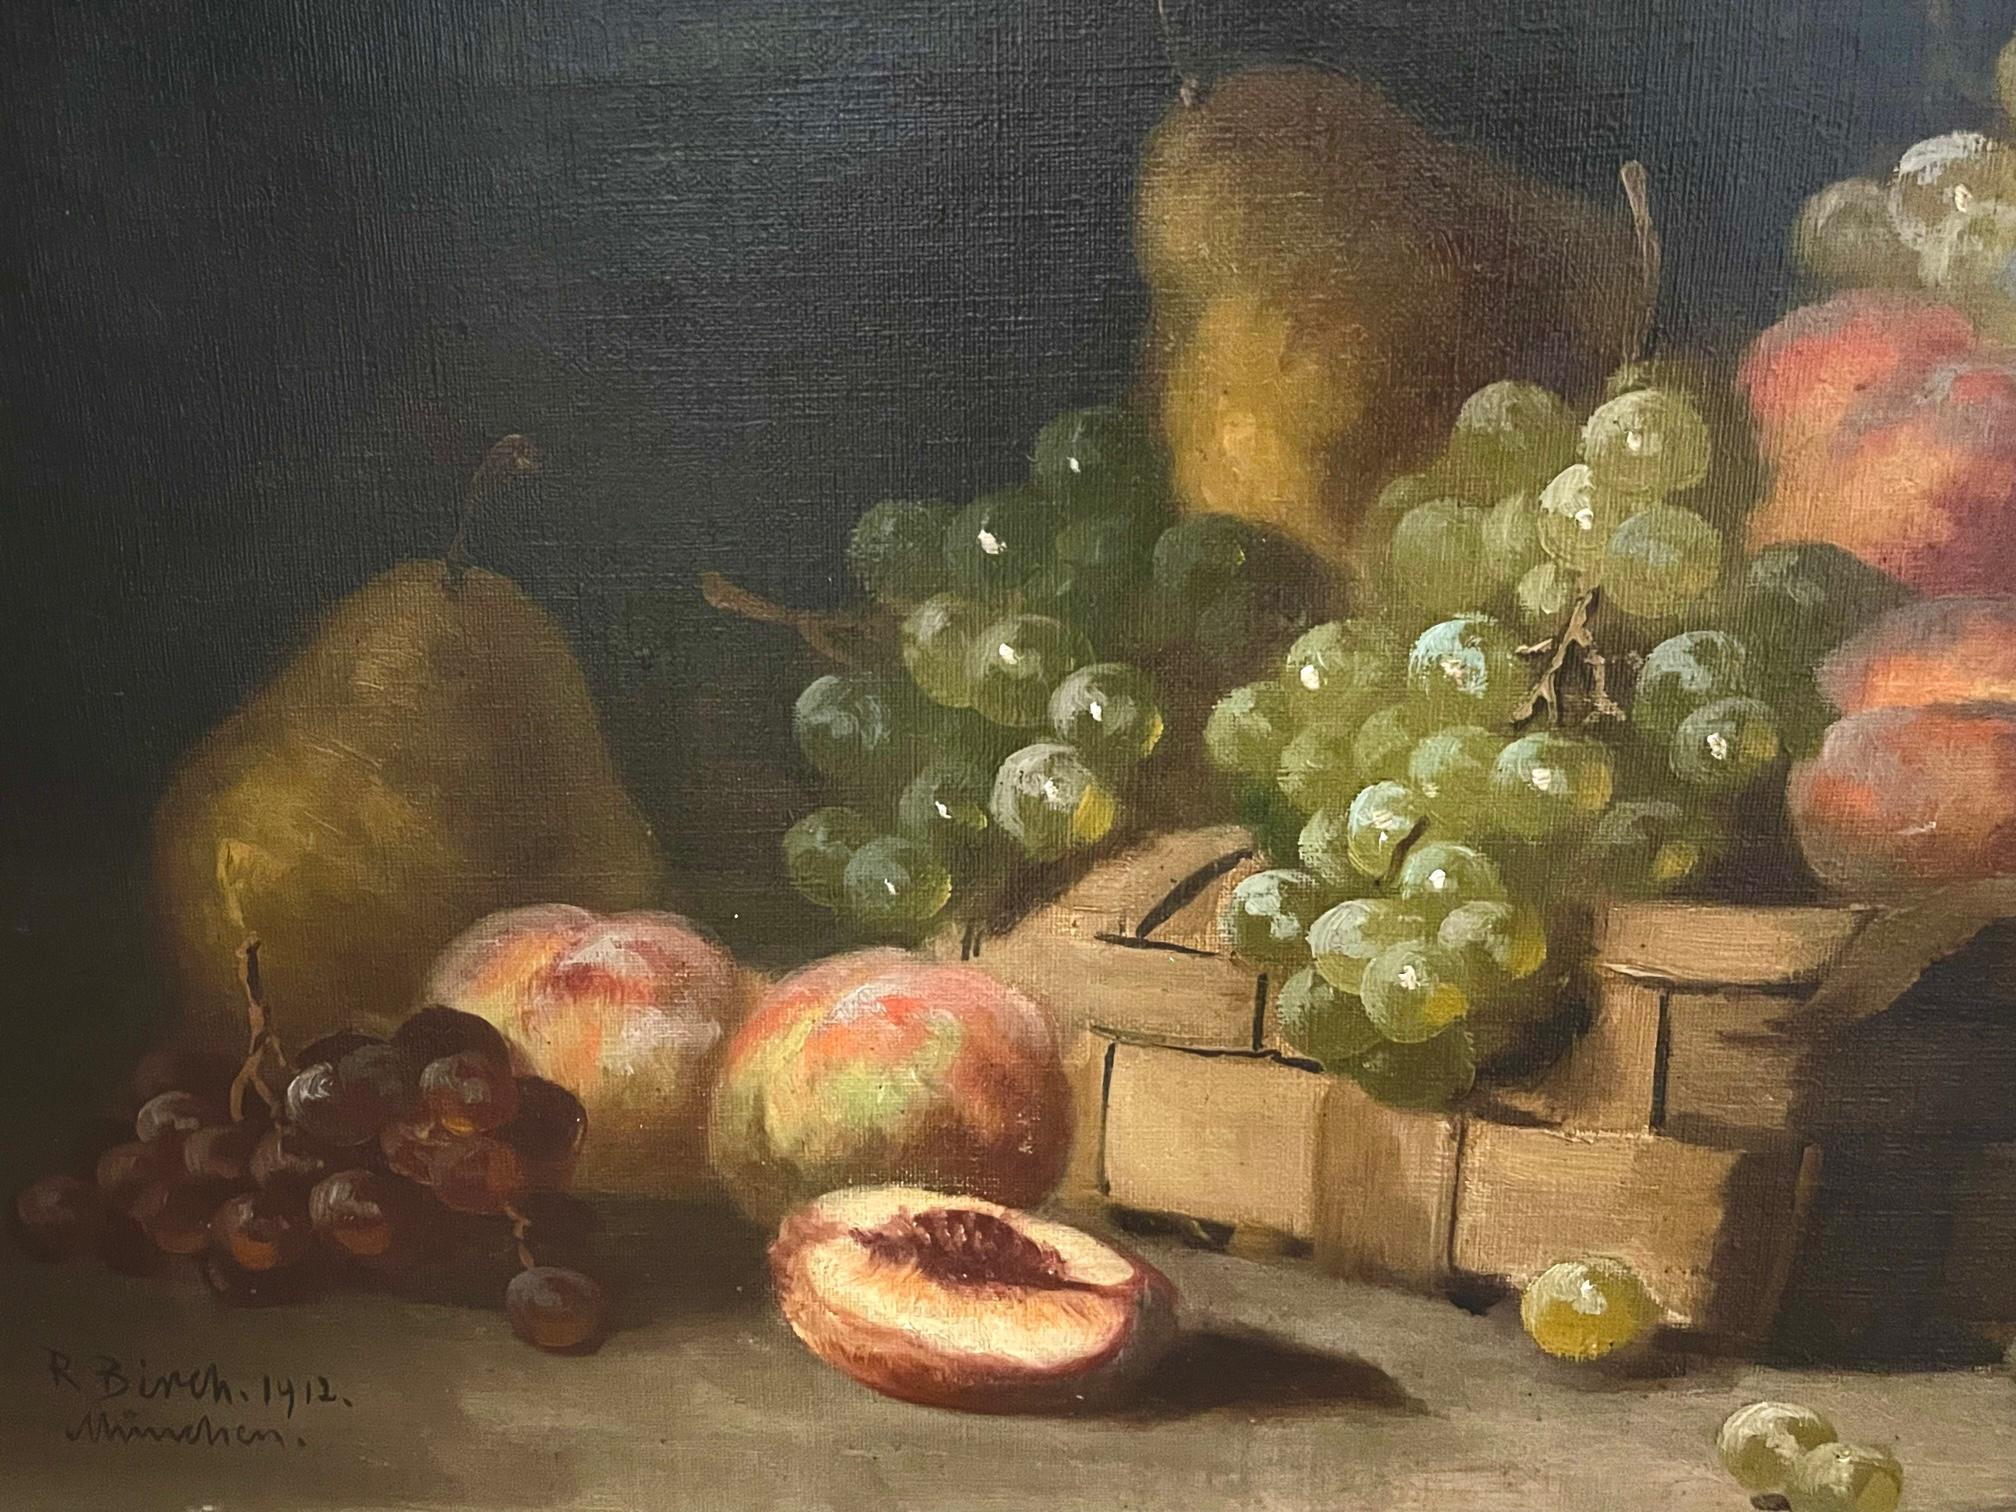 
Early 20th century Still Life with Fruits is by Reginald Bathurst Birch (1856-1943). Birch is best known as the famous illustrator of Frances Hodgeson Burnett's book 'Little Lord Fauntleroy', published in 1886, but Birch was also a fine artist of